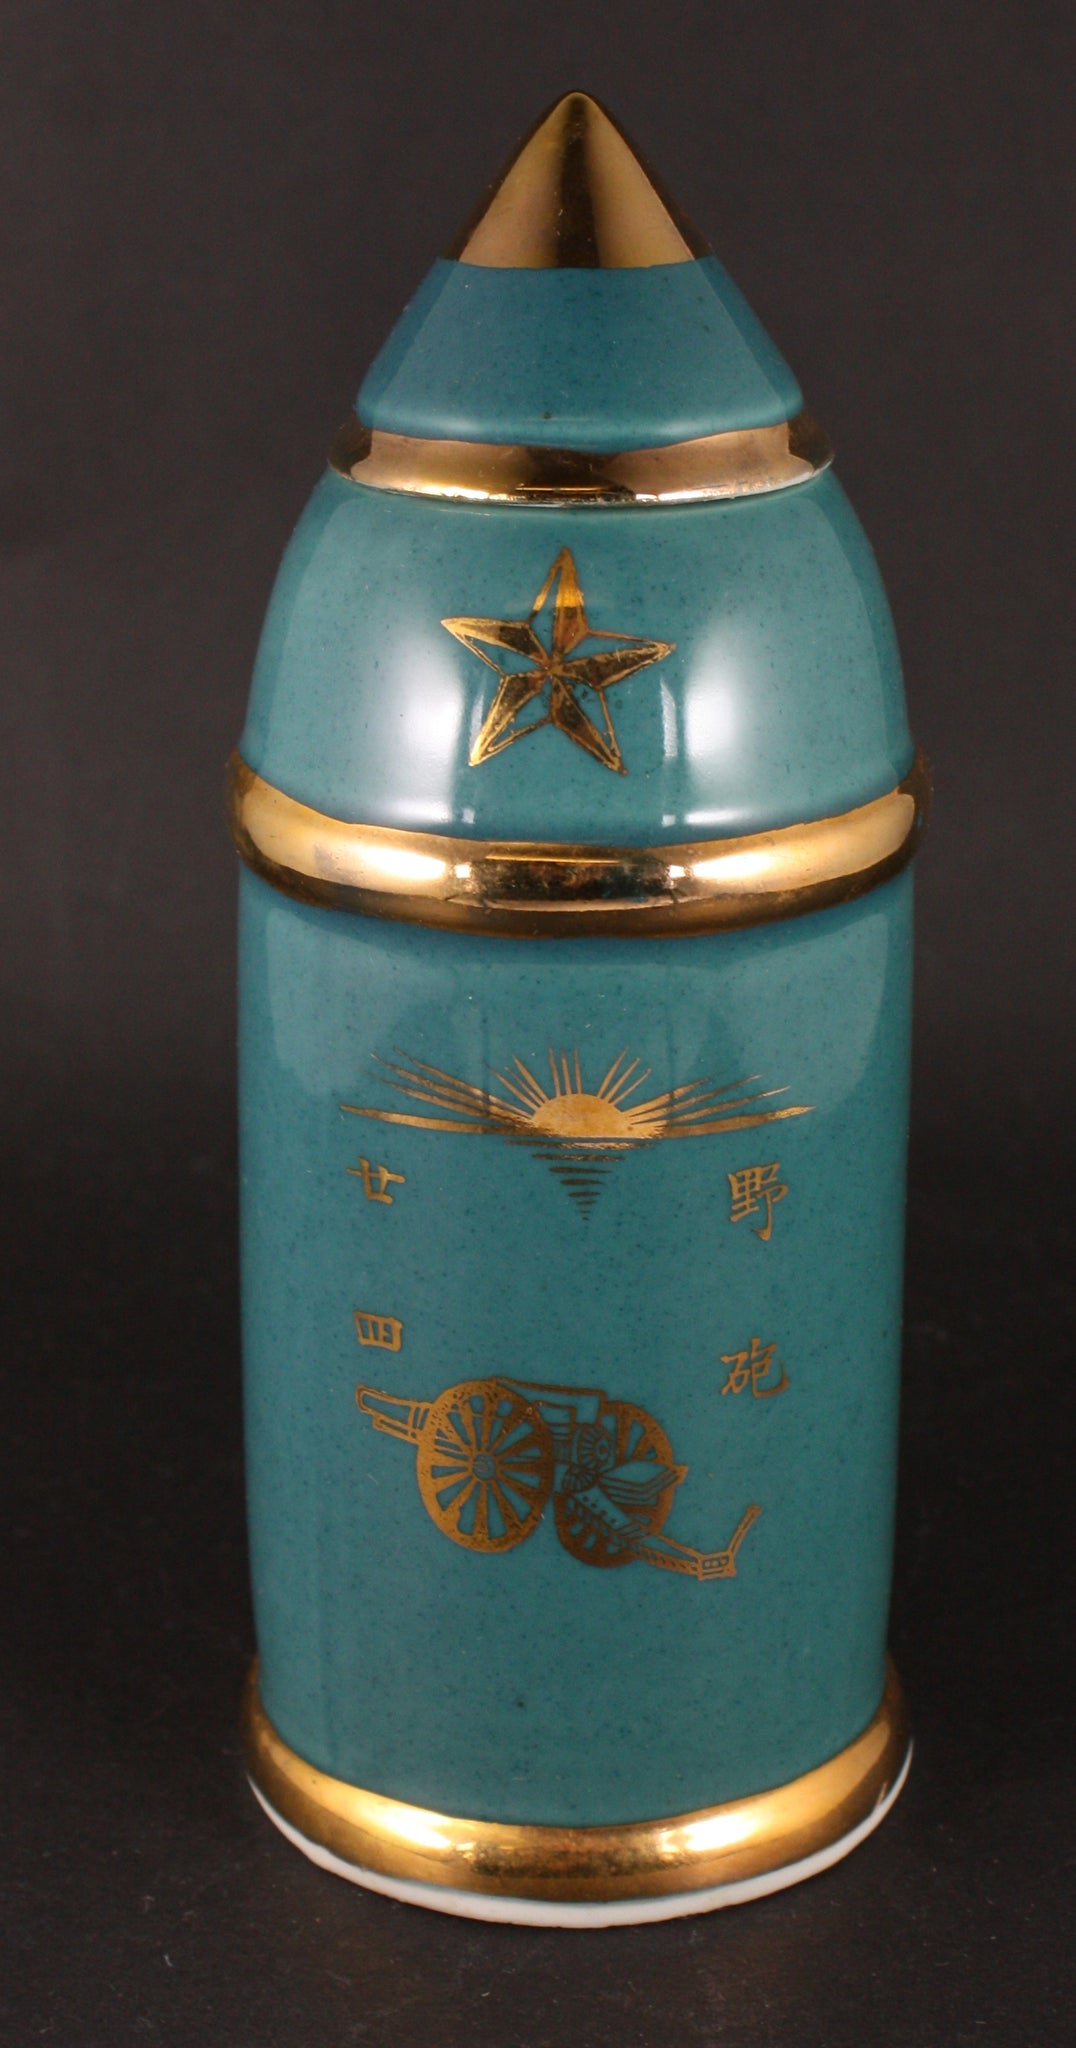 Rare Antique Japanese Military Shell Shaped Artillery Army Sake Bottle with Box